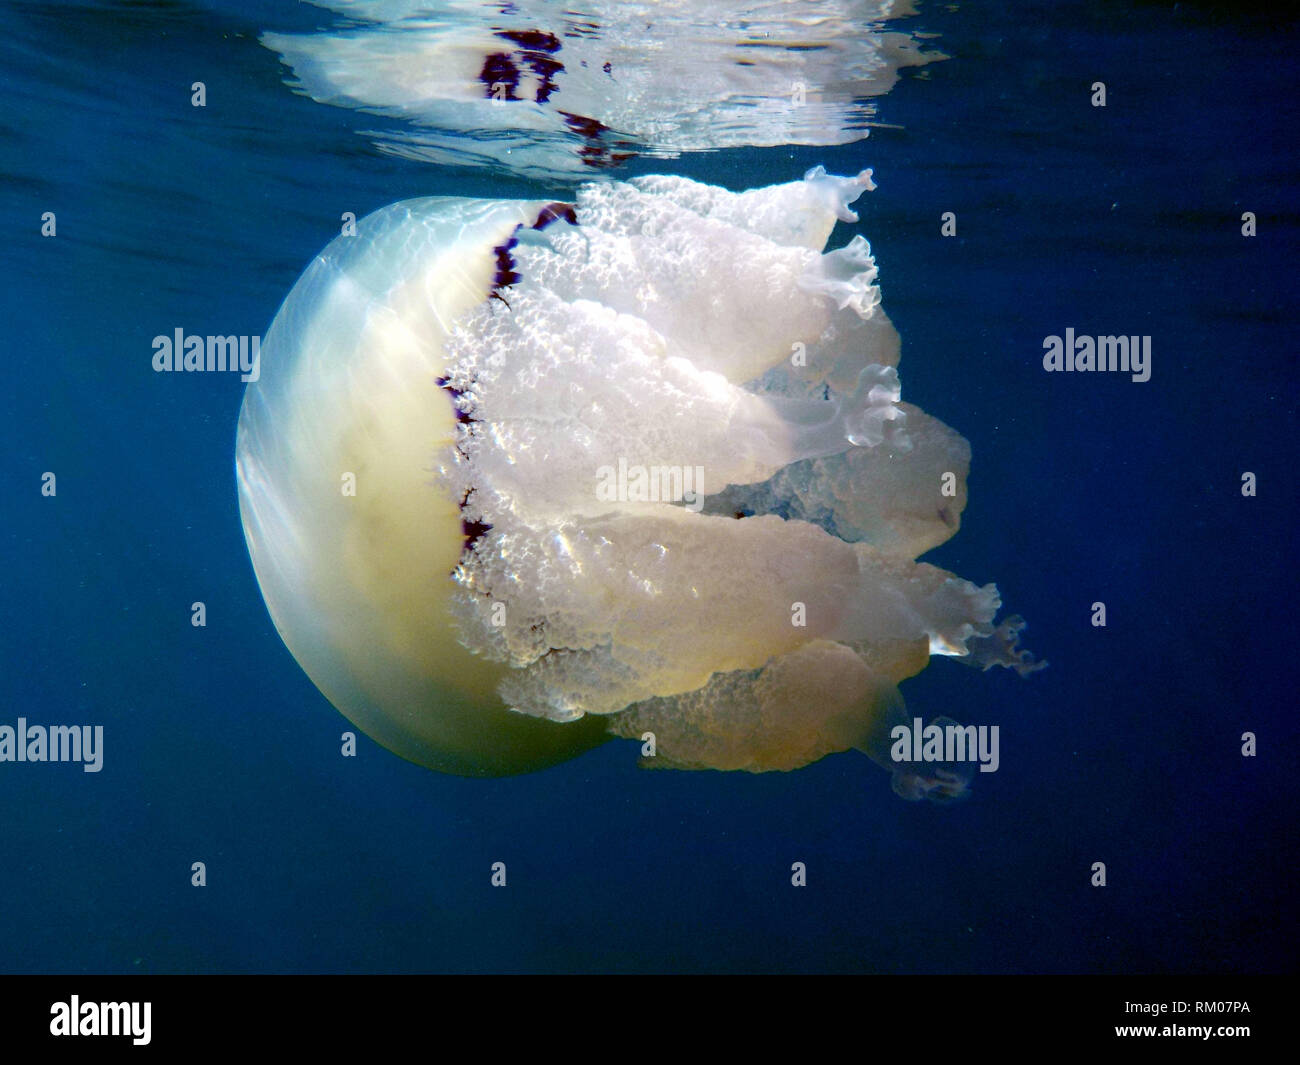 barrel jellyfish or dustbin-lid jellyfish or frilly-mouthed rhizostoma pulmo true jellyfish class scyphozoa is gently carried away by the sea current Stock Photo